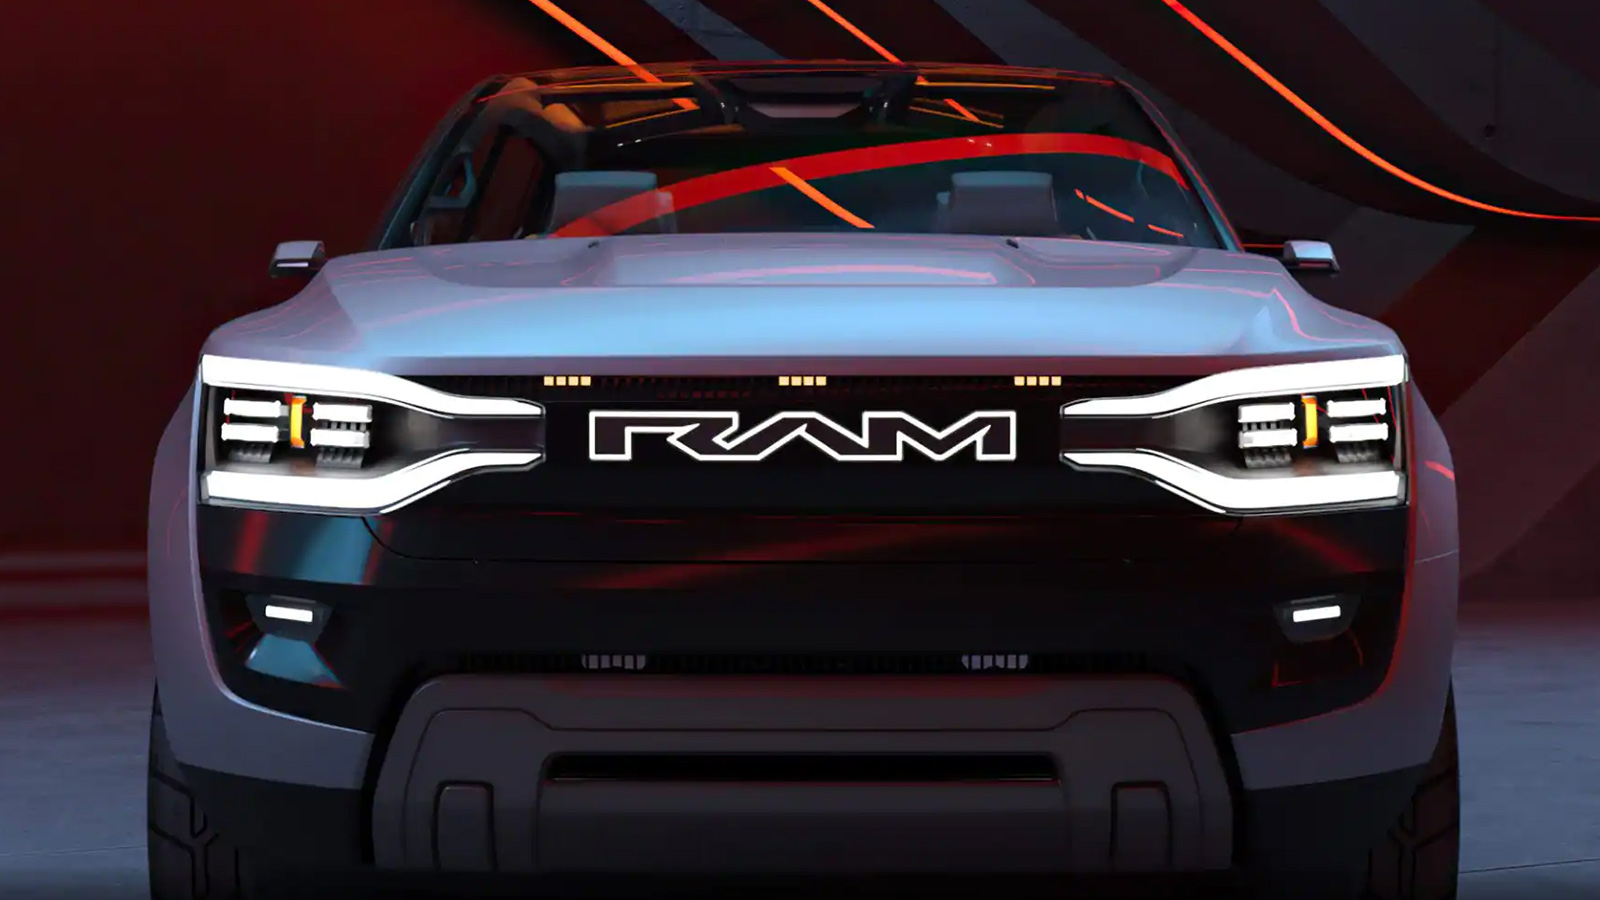 Ram Unveils Its Most Expensive Pickup Ever - The Car Guide